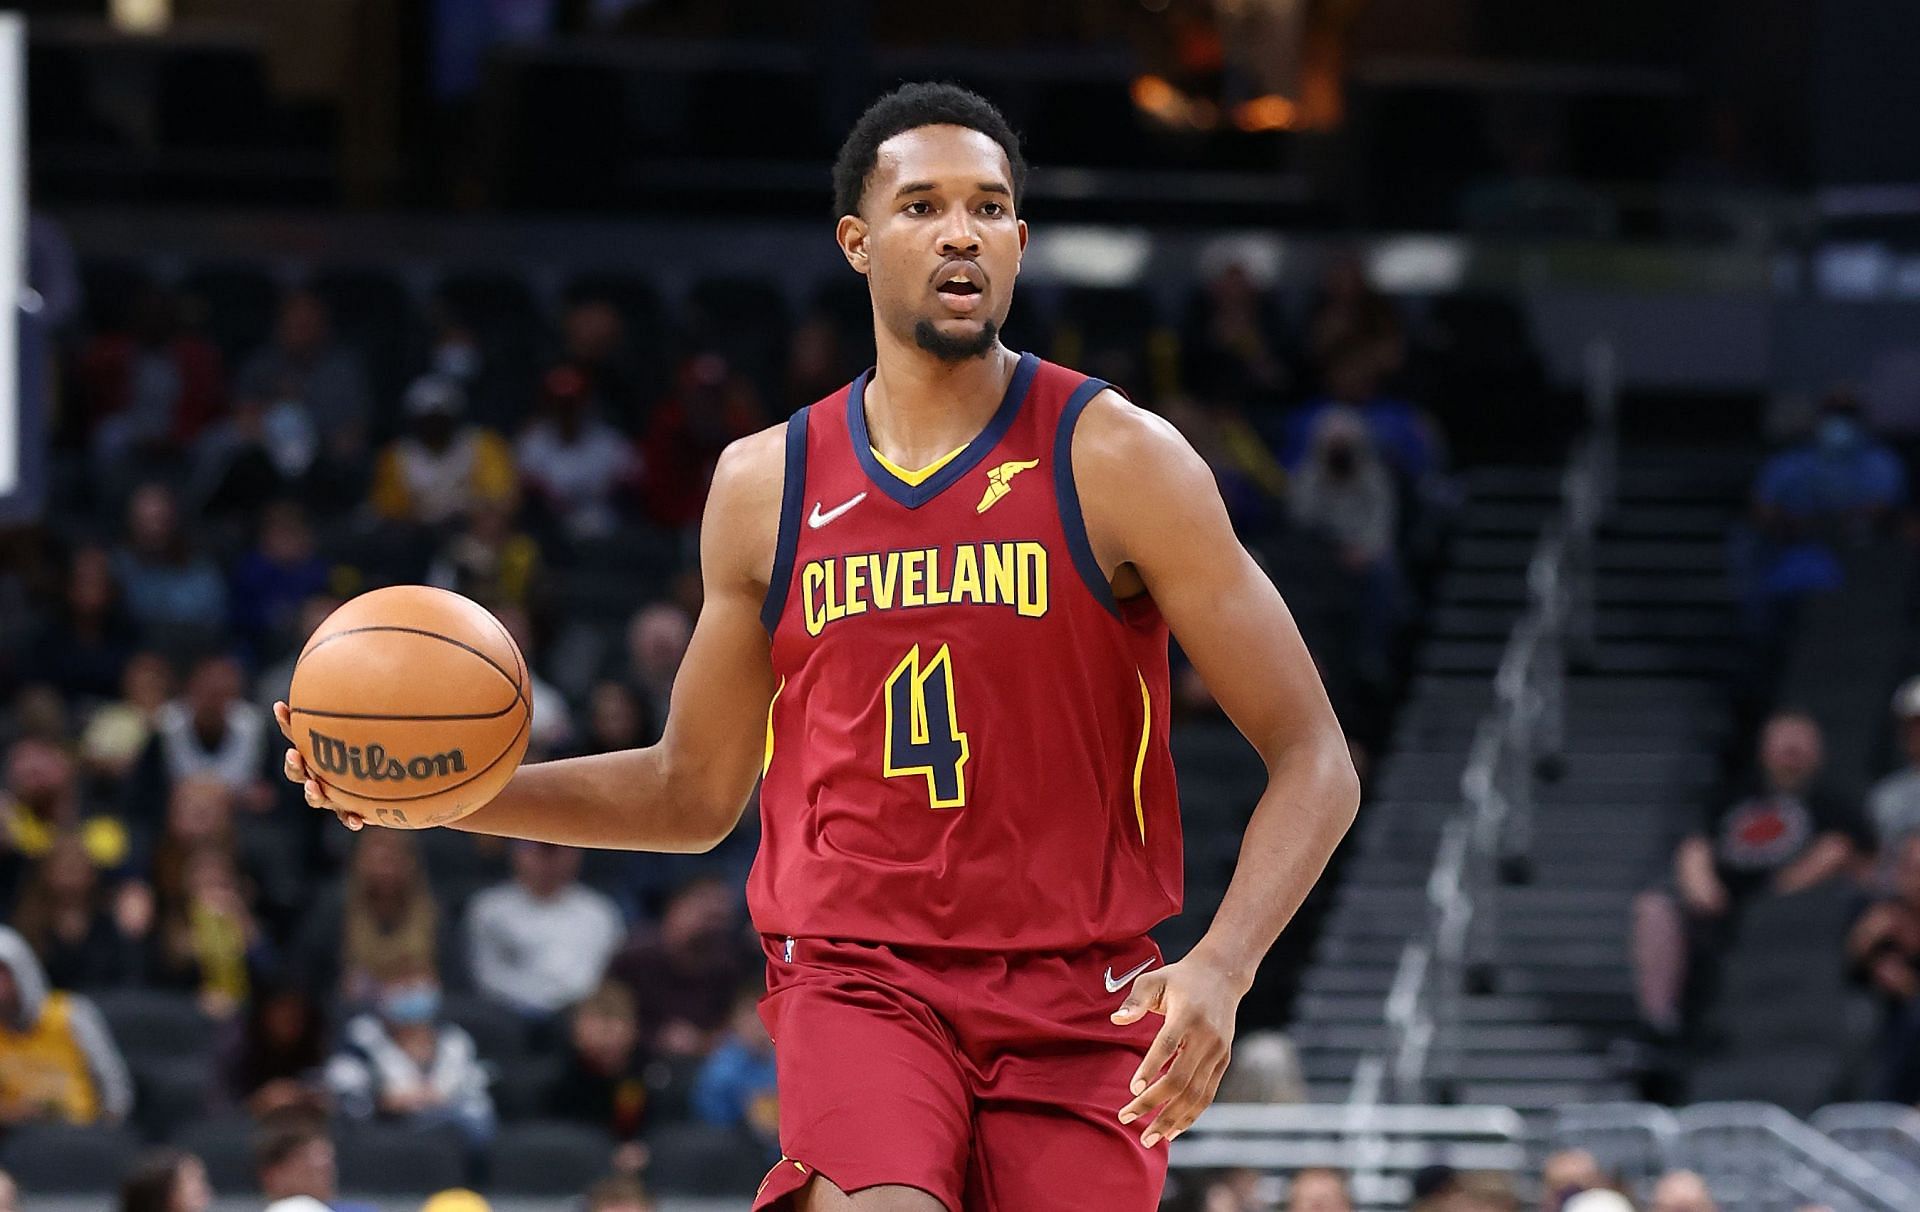 Rookie Evan Mobley of the Cleveland Cavaliers